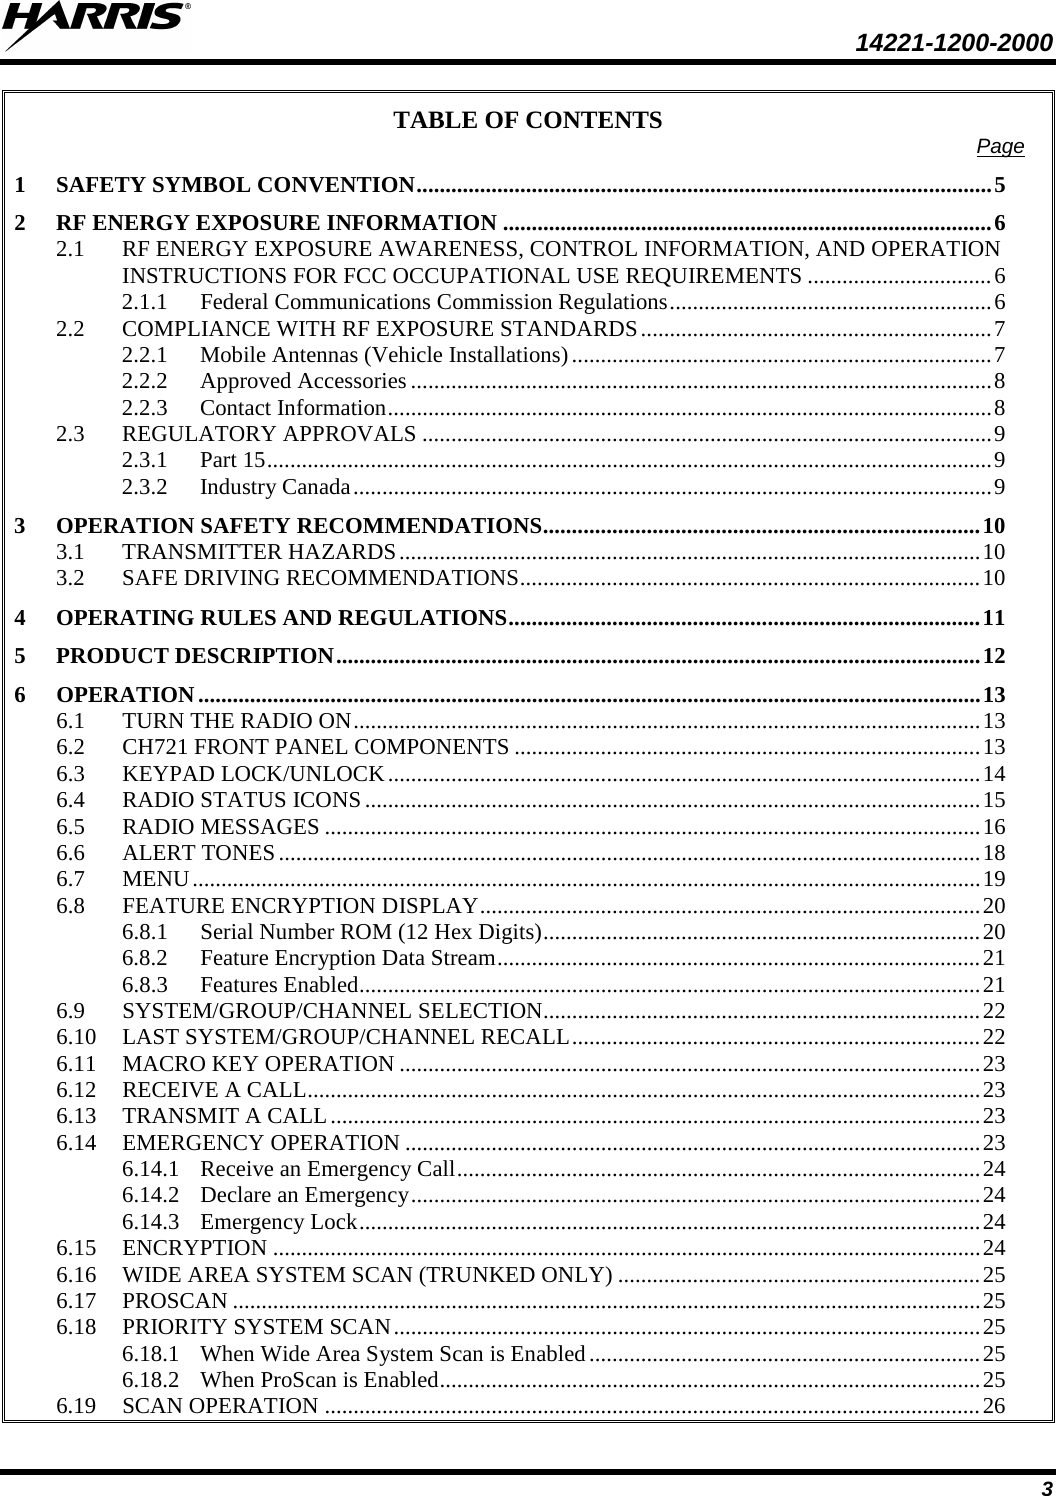  14221-1200-2000 3 TABLE OF CONTENTS Page 1 SAFETY SYMBOL CONVENTION .................................................................................................... 5 2 RF ENERGY EXPOSURE INFORMATION ..................................................................................... 6 2.1 RF ENERGY EXPOSURE AWARENESS, CONTROL INFORMATION, AND OPERATION INSTRUCTIONS FOR FCC OCCUPATIONAL USE REQUIREMENTS ................................ 6 2.1.1 Federal Communications Commission Regulations ........................................................ 6 2.2 COMPLIANCE WITH RF EXPOSURE STANDARDS ............................................................. 7 2.2.1 Mobile Antennas (Vehicle Installations) ......................................................................... 7 2.2.2 Approved Accessories ..................................................................................................... 8 2.2.3 Contact Information ......................................................................................................... 8 2.3 REGULATORY APPROVALS ................................................................................................... 9 2.3.1 Part 15 .............................................................................................................................. 9 2.3.2 Industry Canada   ............................................................................................................... 93 OPERATION SAFETY RECOMMENDATIONS ............................................................................ 10 3.1 TRANSMITTER HAZARDS ..................................................................................................... 10 3.2 SAFE DRIVING RECOMMENDATIONS ................................................................................ 10 4 OPERATING RULES AND REGULATIONS .................................................................................. 11 5 PRODUCT DESCRIPTION ................................................................................................................ 12 6 OPERATION ........................................................................................................................................ 13 6.1 TURN THE RADIO ON ............................................................................................................. 13 6.2 CH721 FRONT PANEL COMPONENTS ................................................................................. 13 6.3 KEYPAD LOCK/UNLOCK ....................................................................................................... 14 6.4 RADIO STATUS ICONS ........................................................................................................... 15 6.5 RADIO MESSAGES .................................................................................................................. 16 6.6 ALERT TONES .......................................................................................................................... 18 6.7 MENU ......................................................................................................................................... 19 6.8 FEATURE ENCRYPTION DISPLAY ....................................................................................... 20 6.8.1 Serial Number ROM (12 Hex Digits) ............................................................................ 20 6.8.2 Feature Encryption Data Stream .................................................................................... 21 6.8.3 Features Enabled ............................................................................................................ 21 6.9 SYSTEM/GROUP/CHANNEL SELECTION............................................................................ 22 6.10 LAST SYSTEM/GROUP/CHANNEL RECALL ....................................................................... 22 6.11 MACRO KEY OPERATION ..................................................................................................... 23 6.12 RECEIVE A CALL ..................................................................................................................... 23 6.13 TRANSMIT A CALL ................................................................................................................. 23 6.14 EMERGENCY OPERATION .................................................................................................... 23 6.14.1 Receive an Emergency Call ........................................................................................... 24 6.14.2 Declare an Emergency ................................................................................................... 24 6.14.3 Emergency Lock ............................................................................................................ 24 6.15 ENCRYPTION ........................................................................................................................... 24 6.16 WIDE AREA SYSTEM SCAN (TRUNKED ONLY) ............................................................... 25 6.17 PROSCAN .................................................................................................................................. 25 6.18 PRIORITY SYSTEM SCAN ...................................................................................................... 25 6.18.1 When Wide Area System Scan is Enabled .................................................................... 25 6.18.2 When ProScan is Enabled .............................................................................................. 25 6.19 SCAN OPERATION .................................................................................................................. 26 